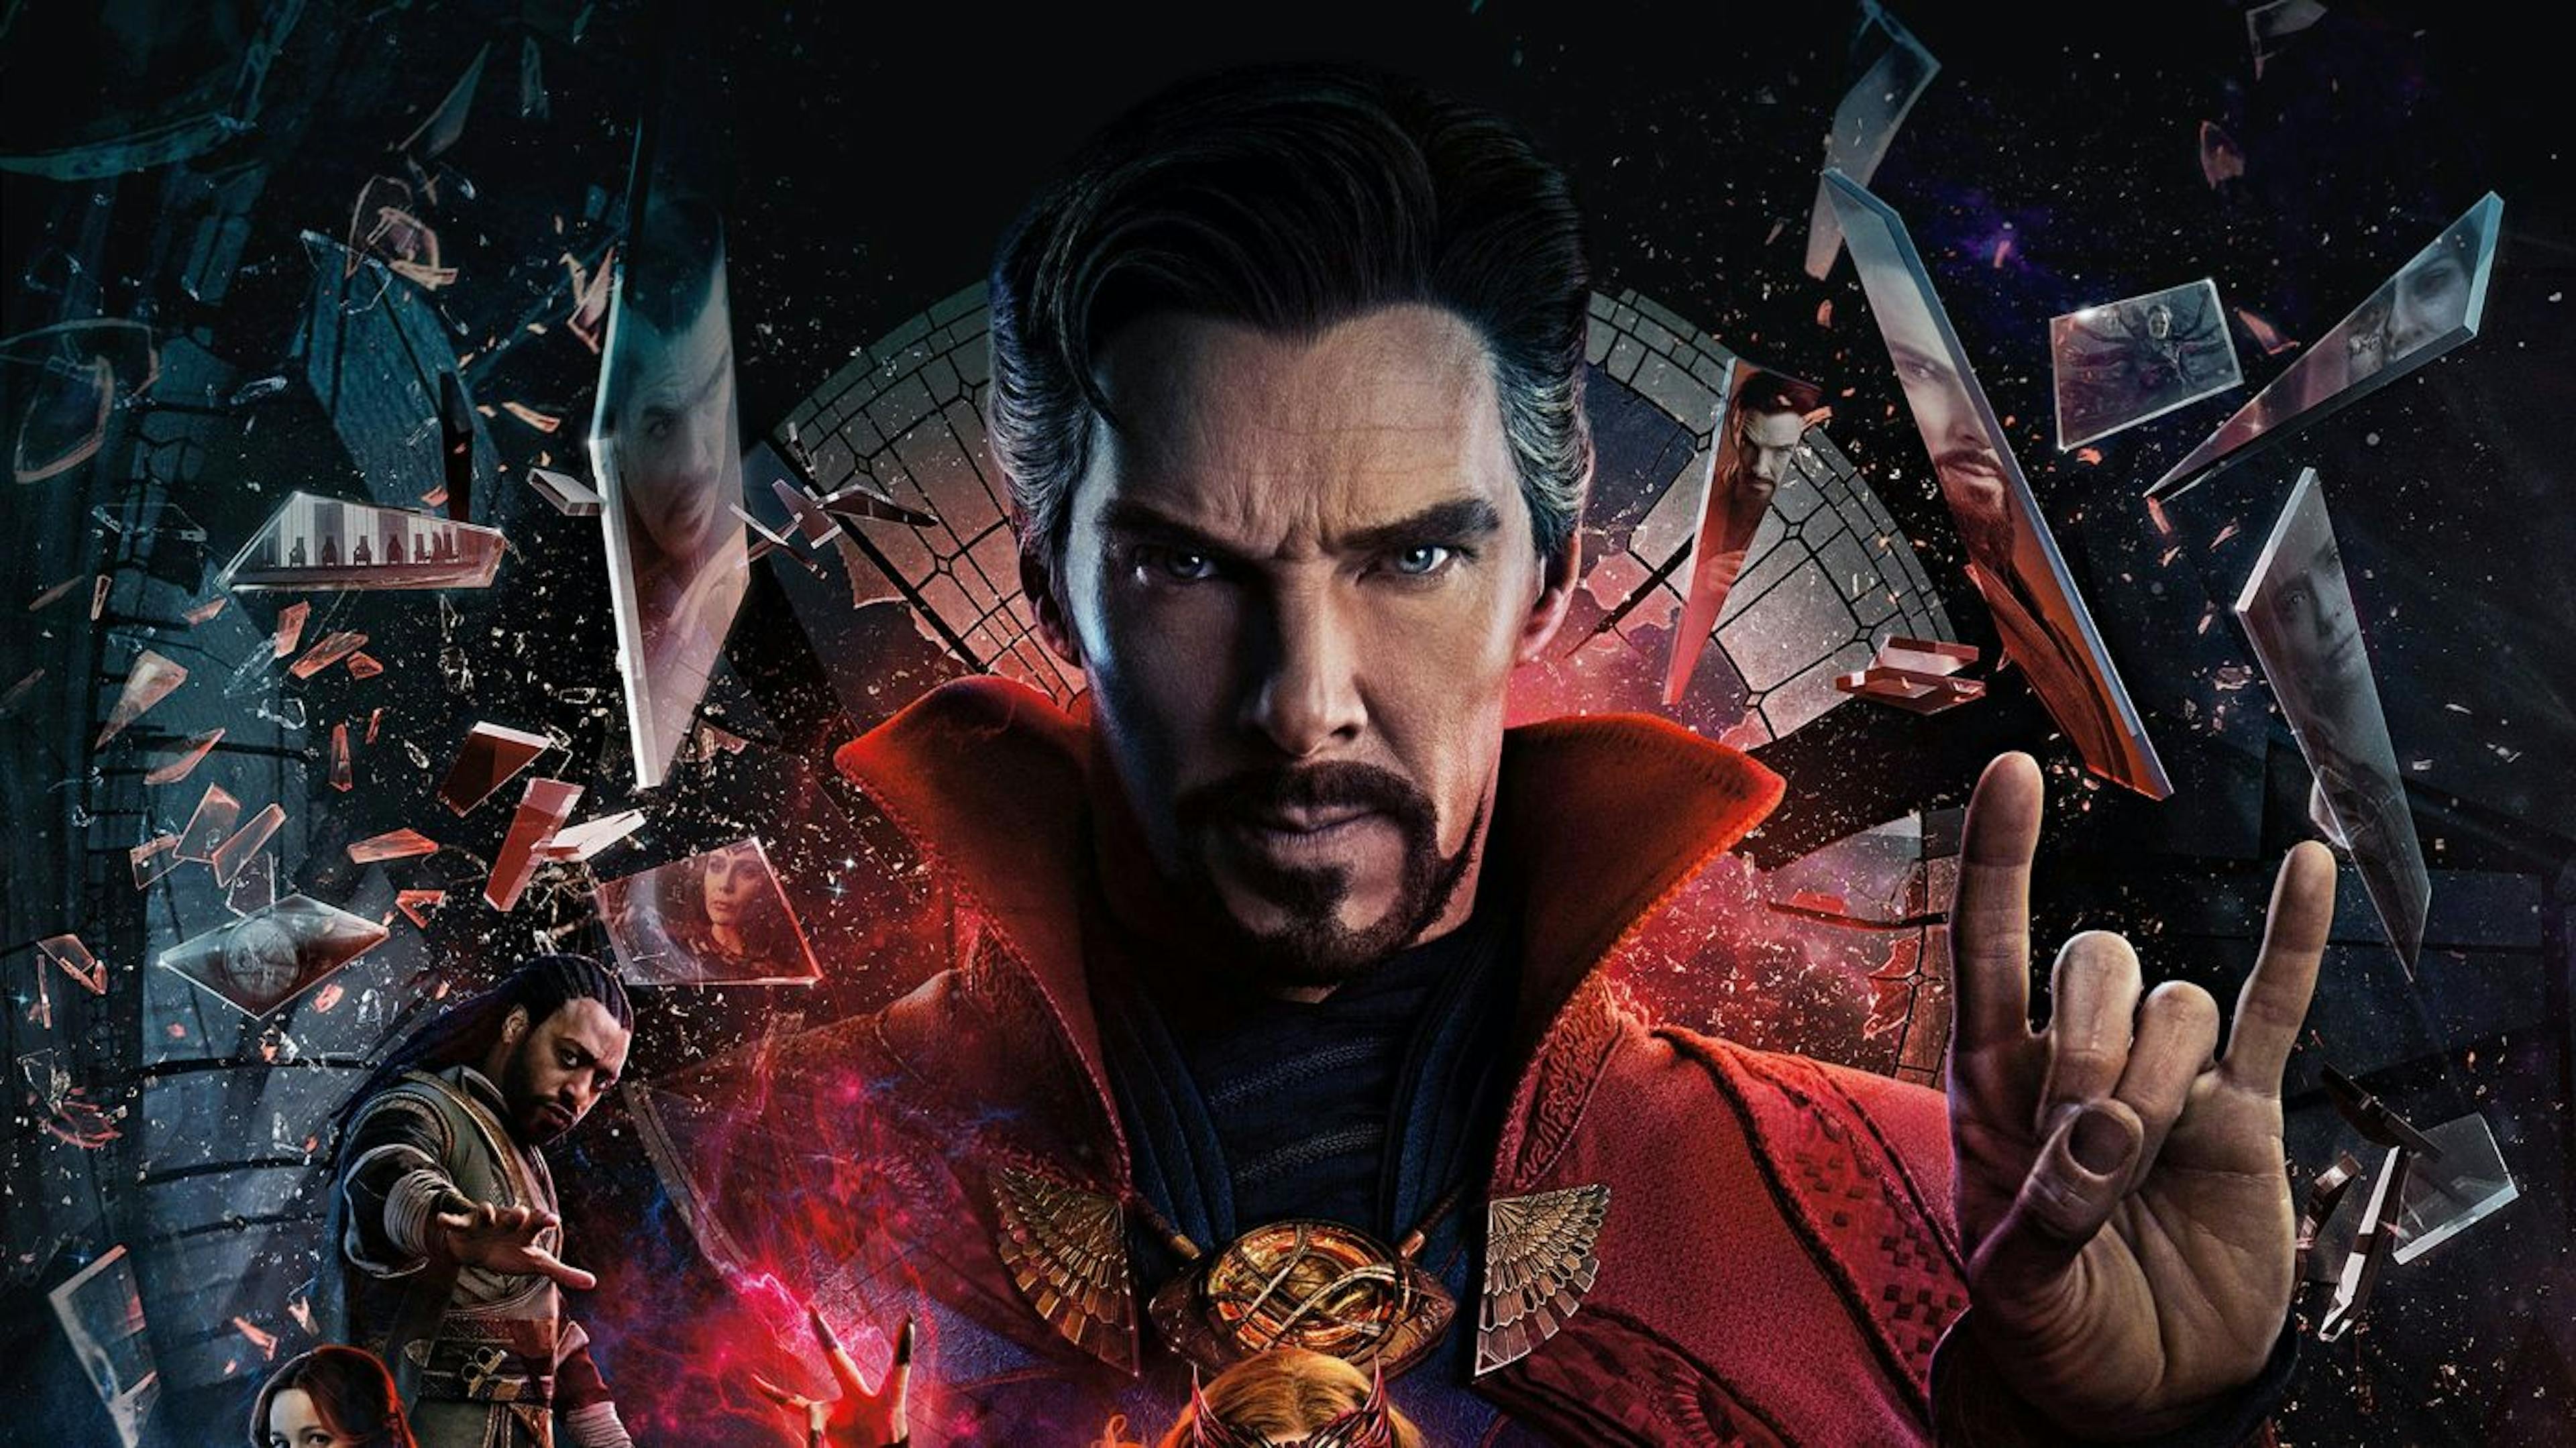 https://4kwallpapers.com/movies/spider-man-no-way-home-doctor-strange-2021-movies-marvel-6970.html